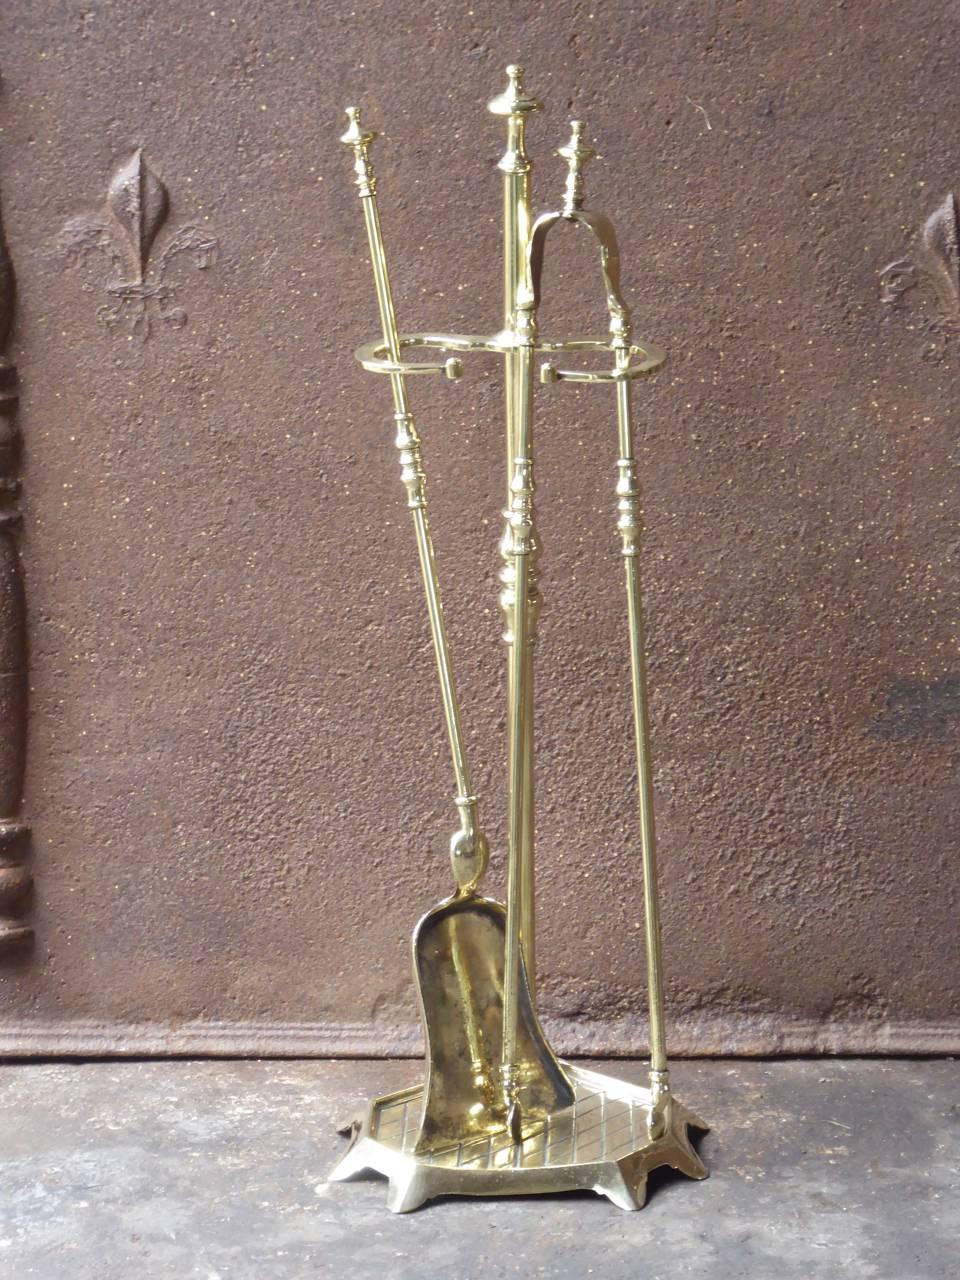 French fireplace tool set, fire irons made of polished brass.

We have a unique and specialized collection of antique and used fireplace accessories consisting of more than 1000 listings at 1stdibs. Amongst others, we always have 300+ firebacks,